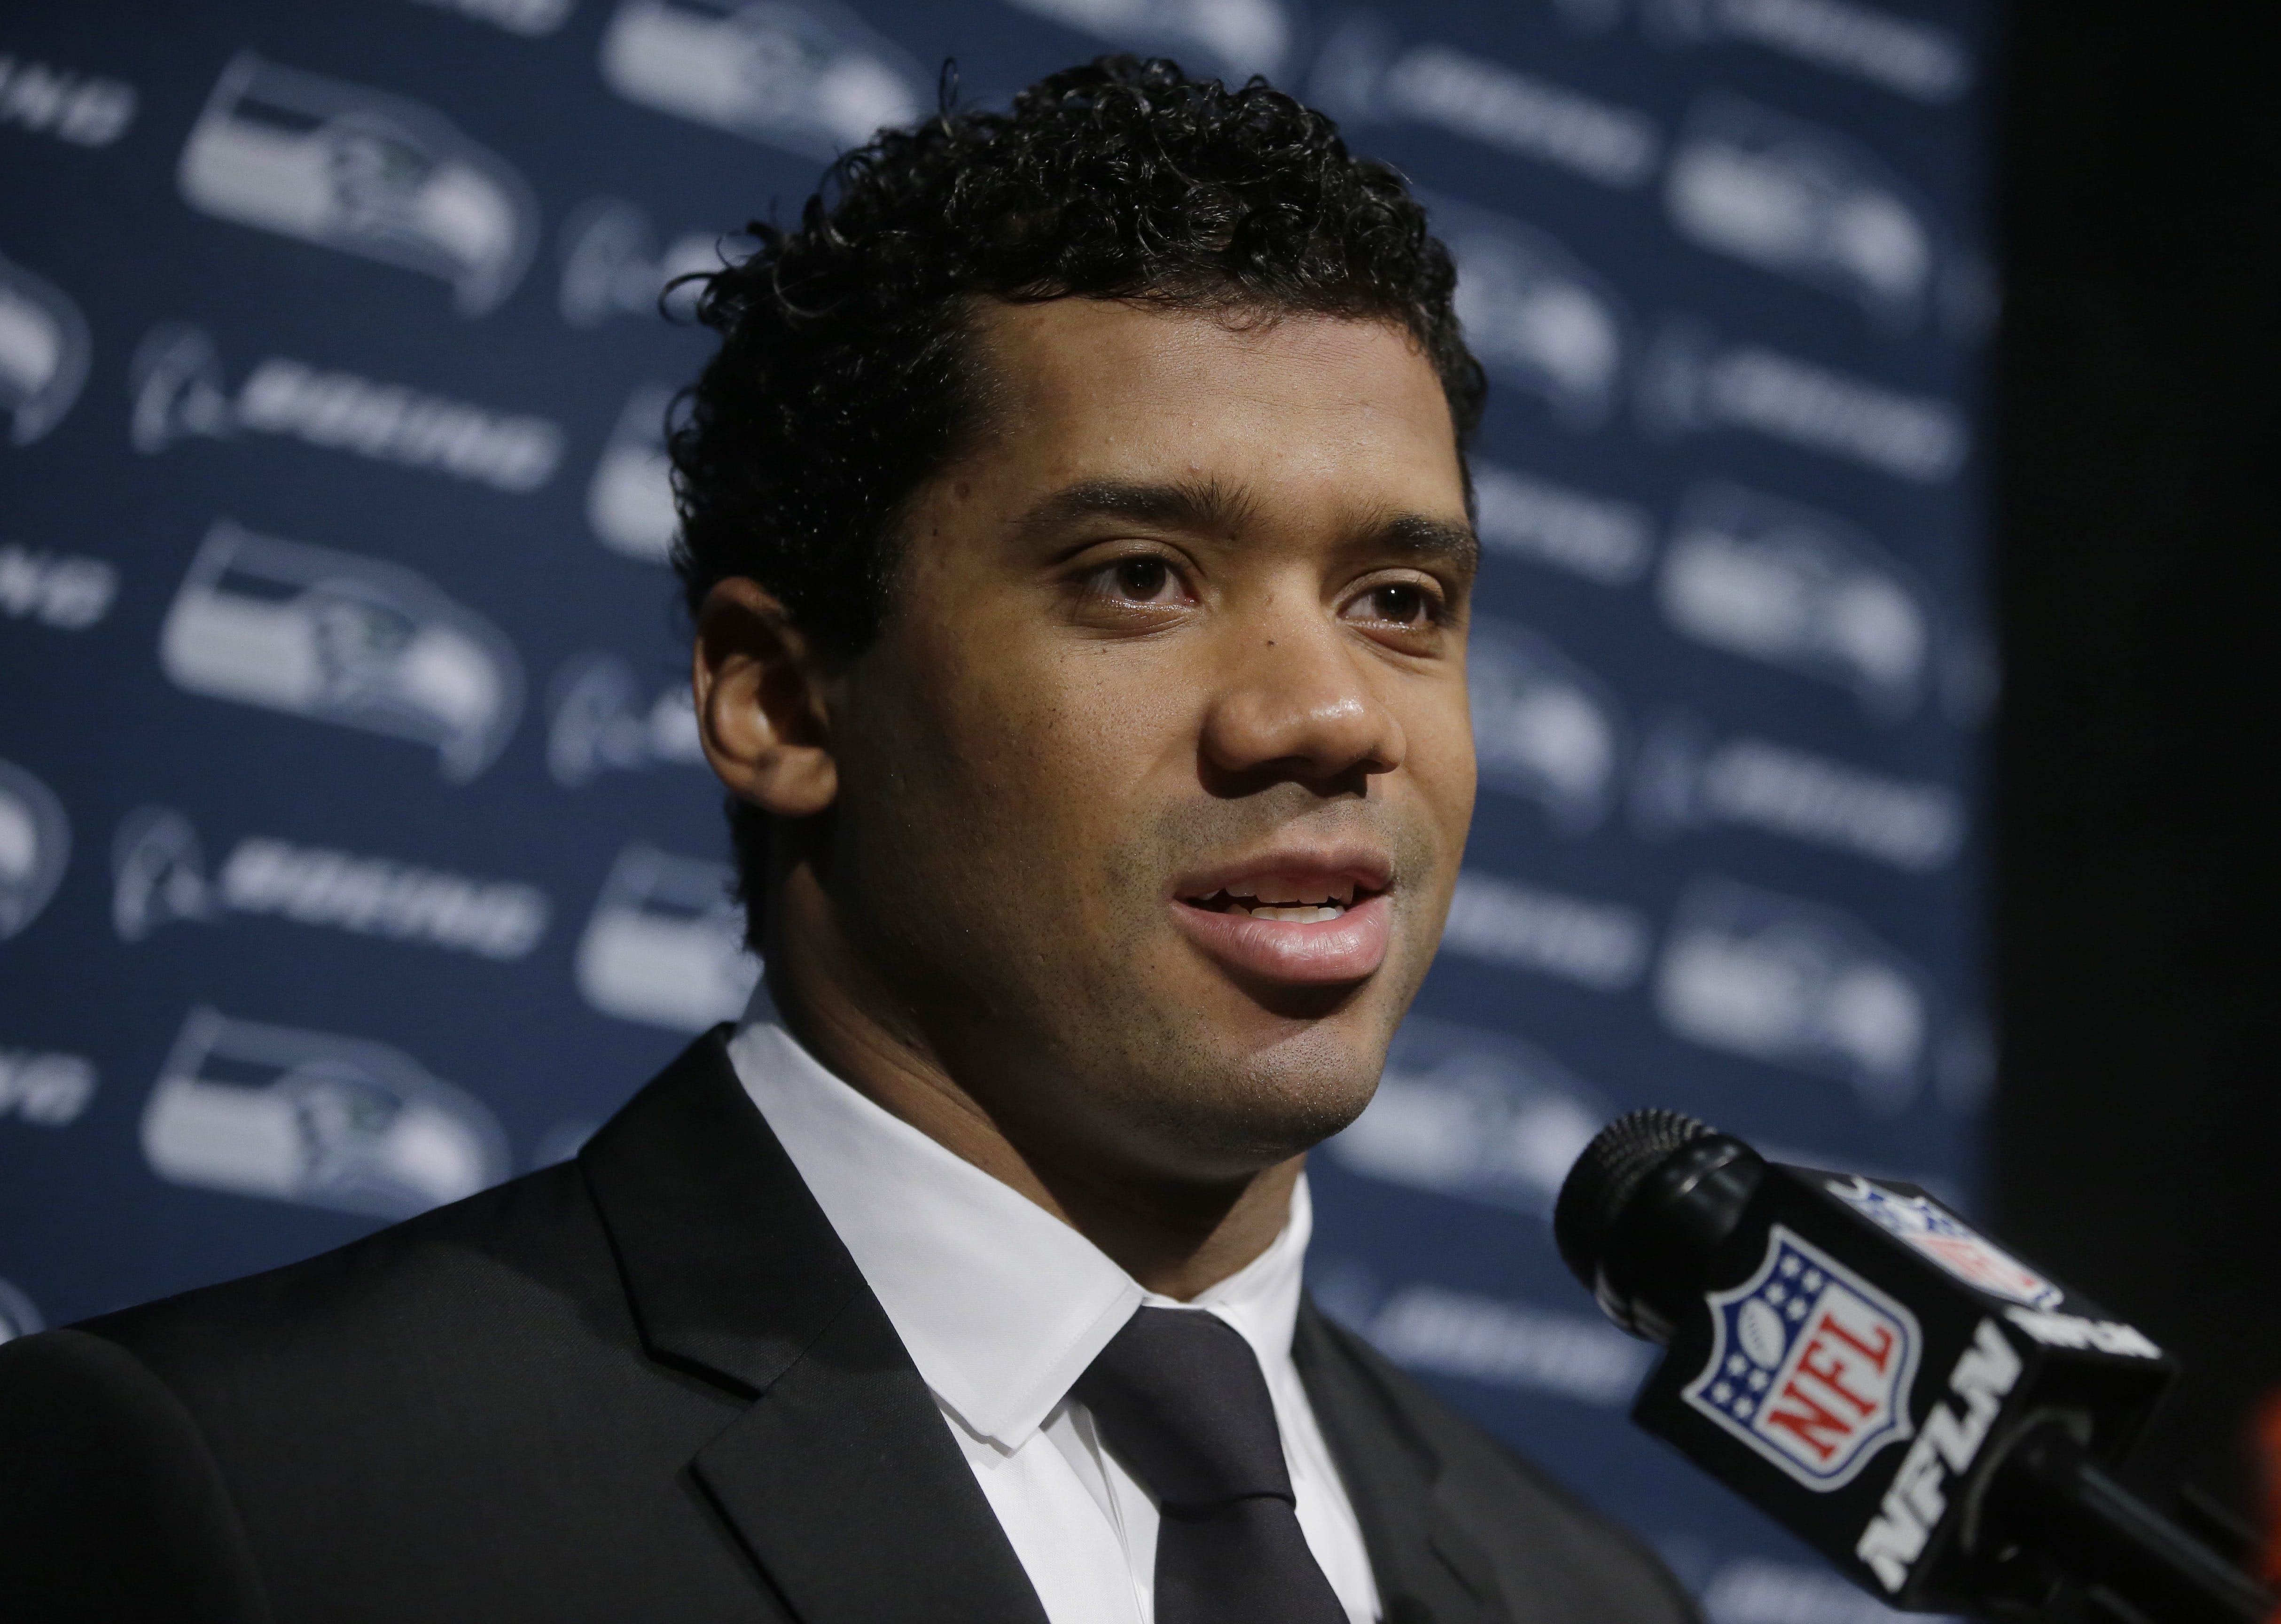 Seattle Seahawks quarterback Russell Wilson speaks to the media following an NFL football game against the New England Patriots, Monday, Nov. 14, 2016, in Foxborough, Mass.